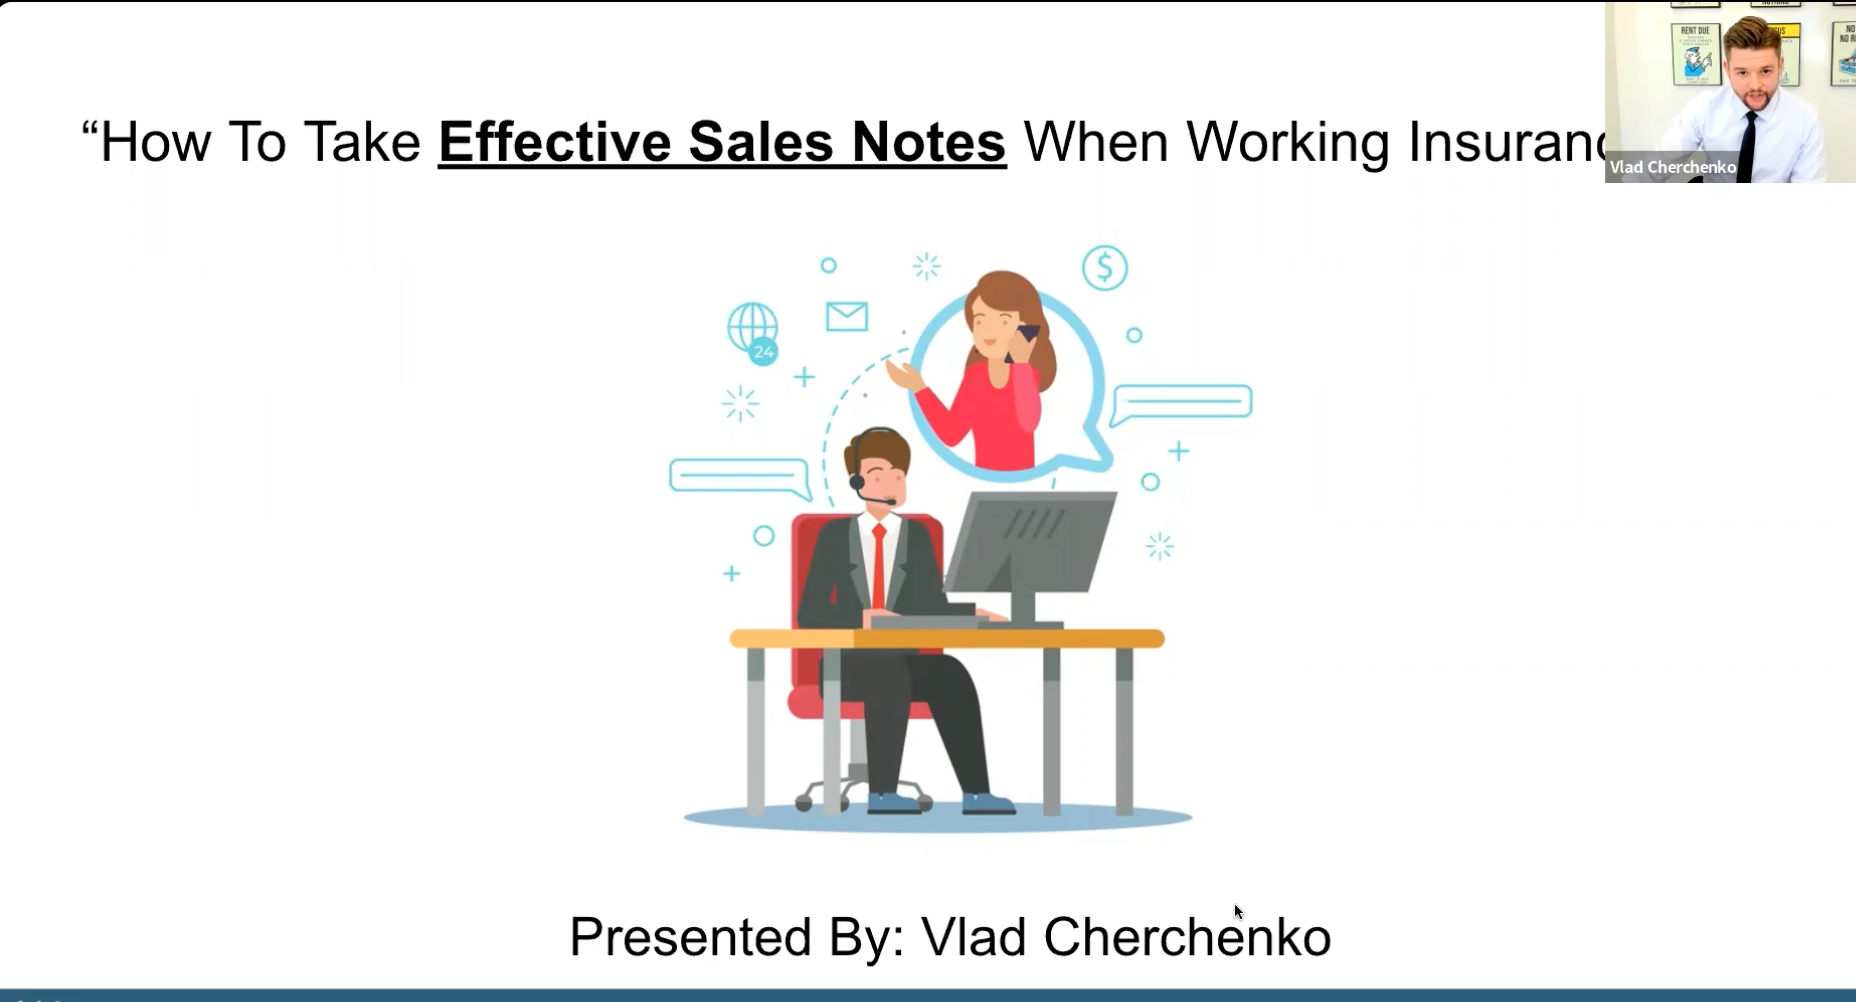 How To Take Effective SALES NOTES When Working Insurance Leads with Vlad Cherchenko